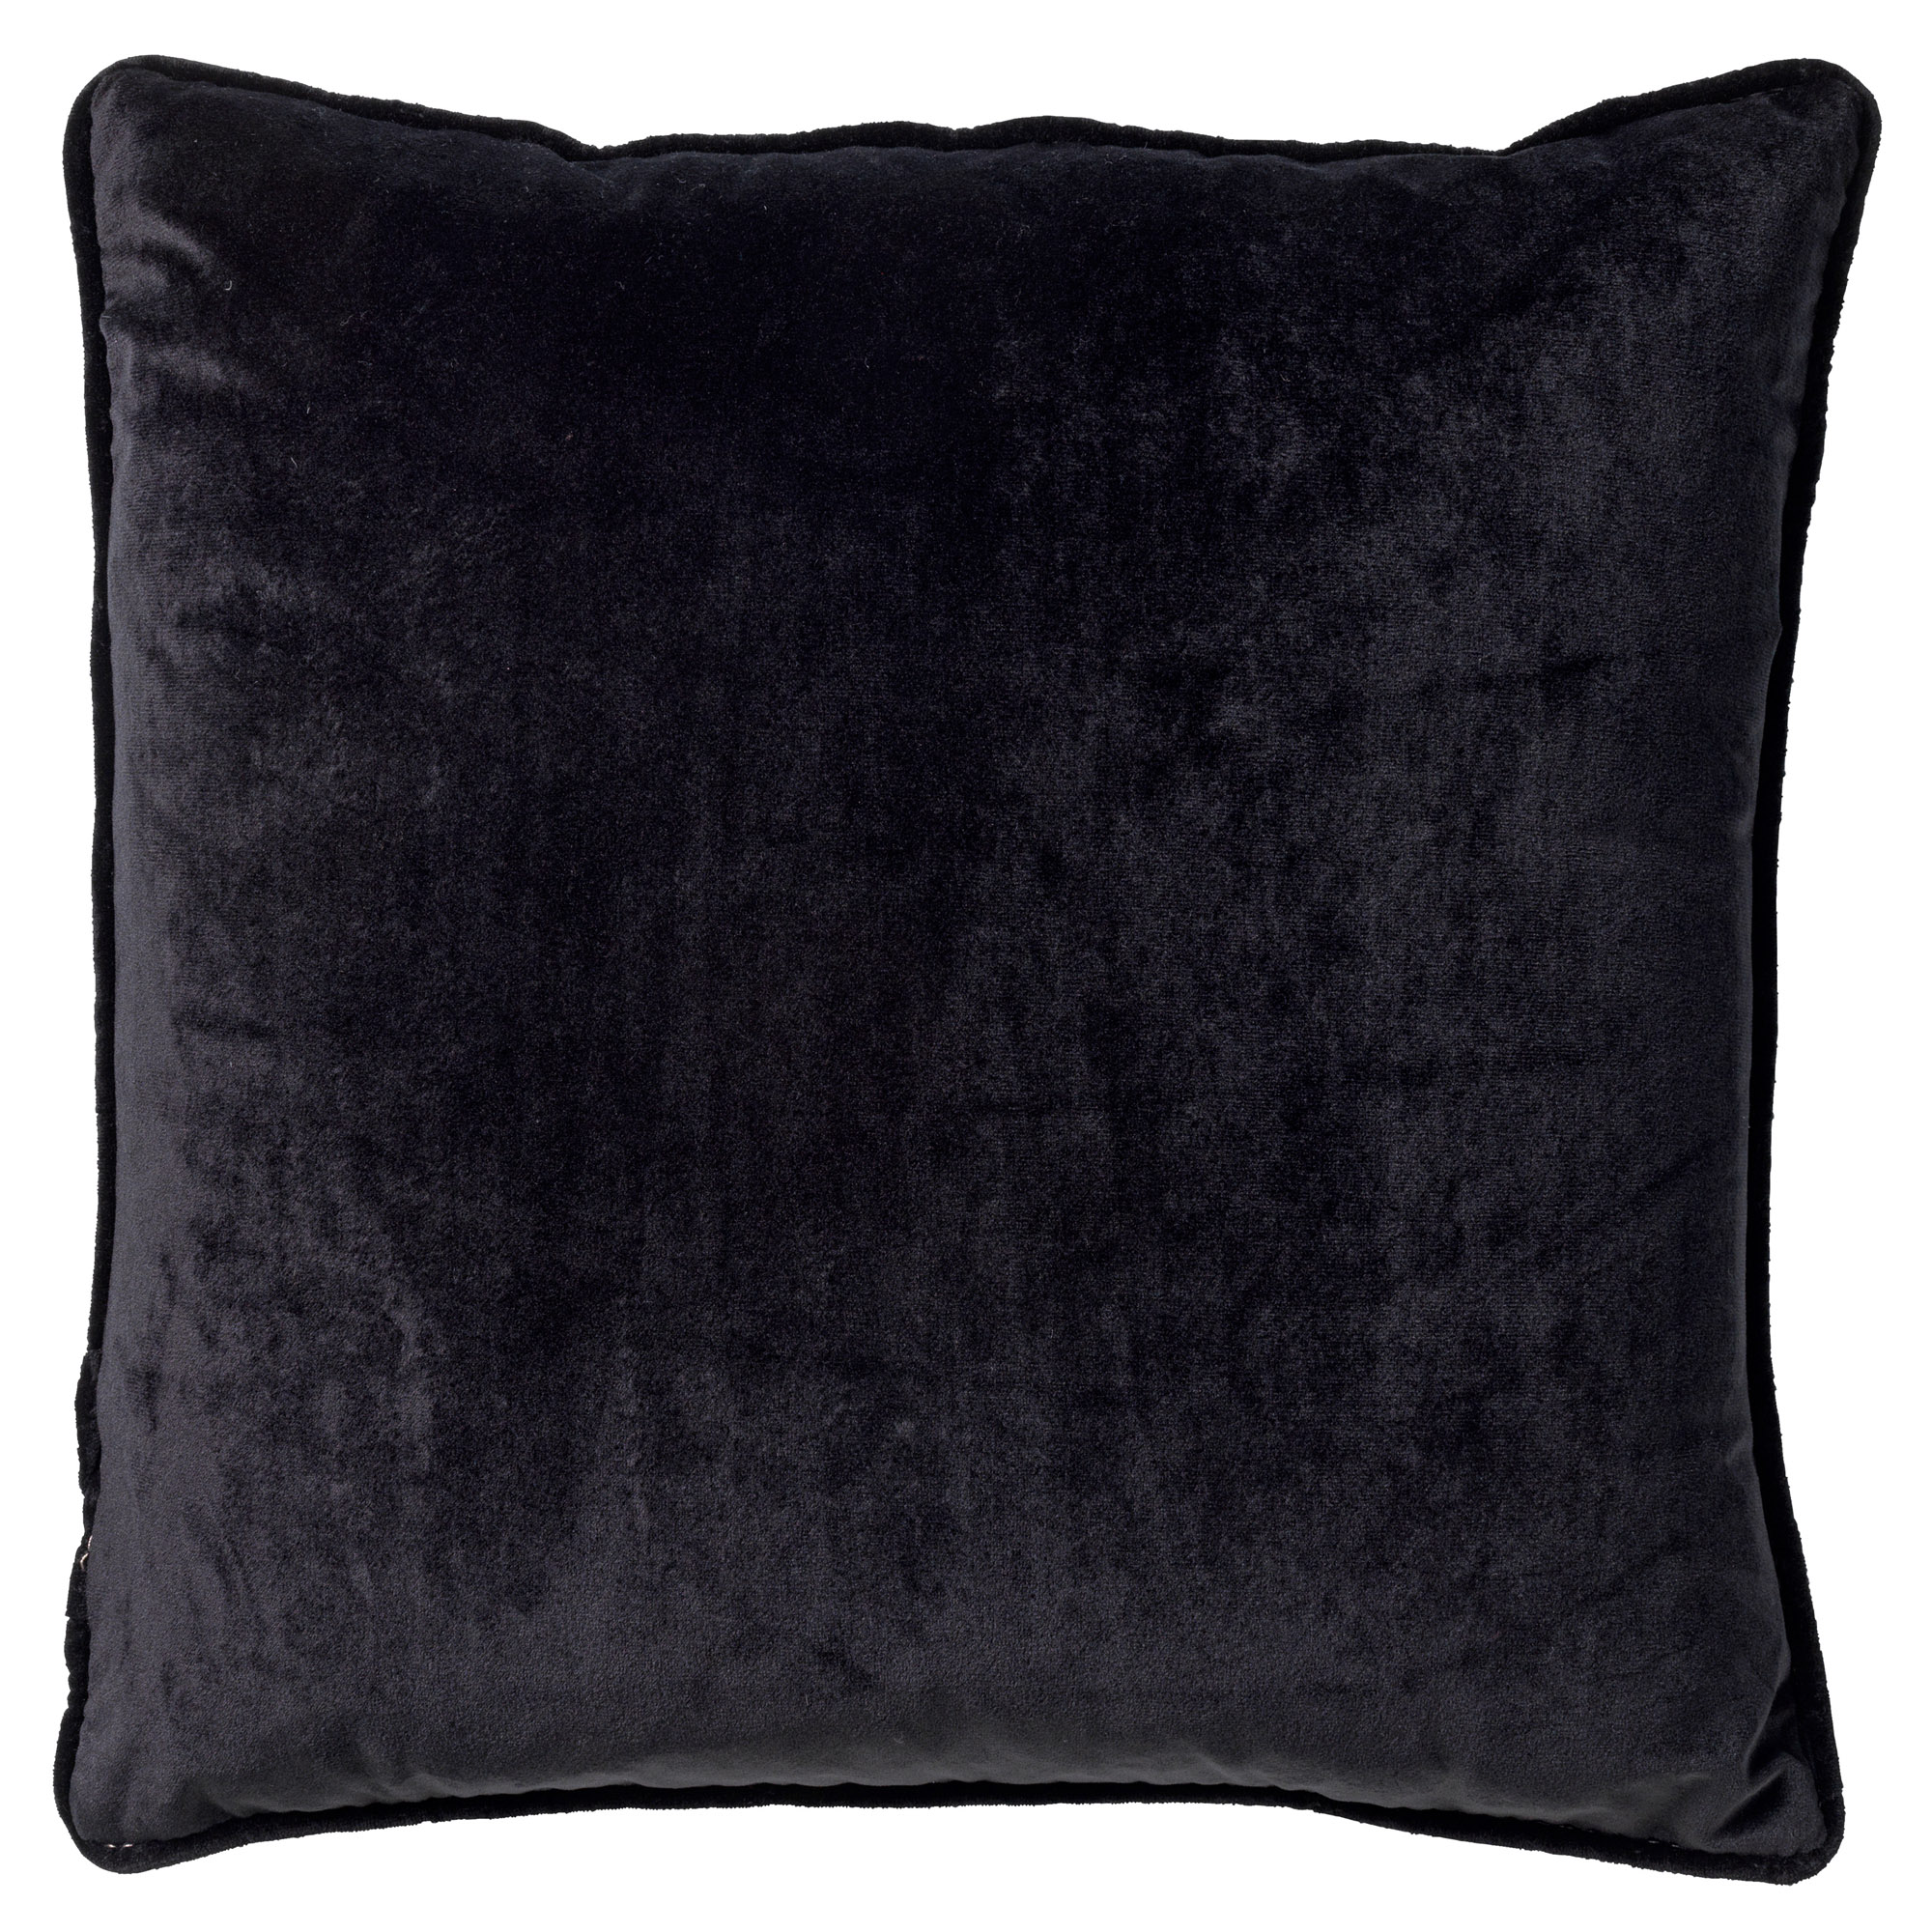 FINNA - Cushion 45x45 cm with cushion cover made of 100% recycled polyester - Eco Line collection - Raven - black